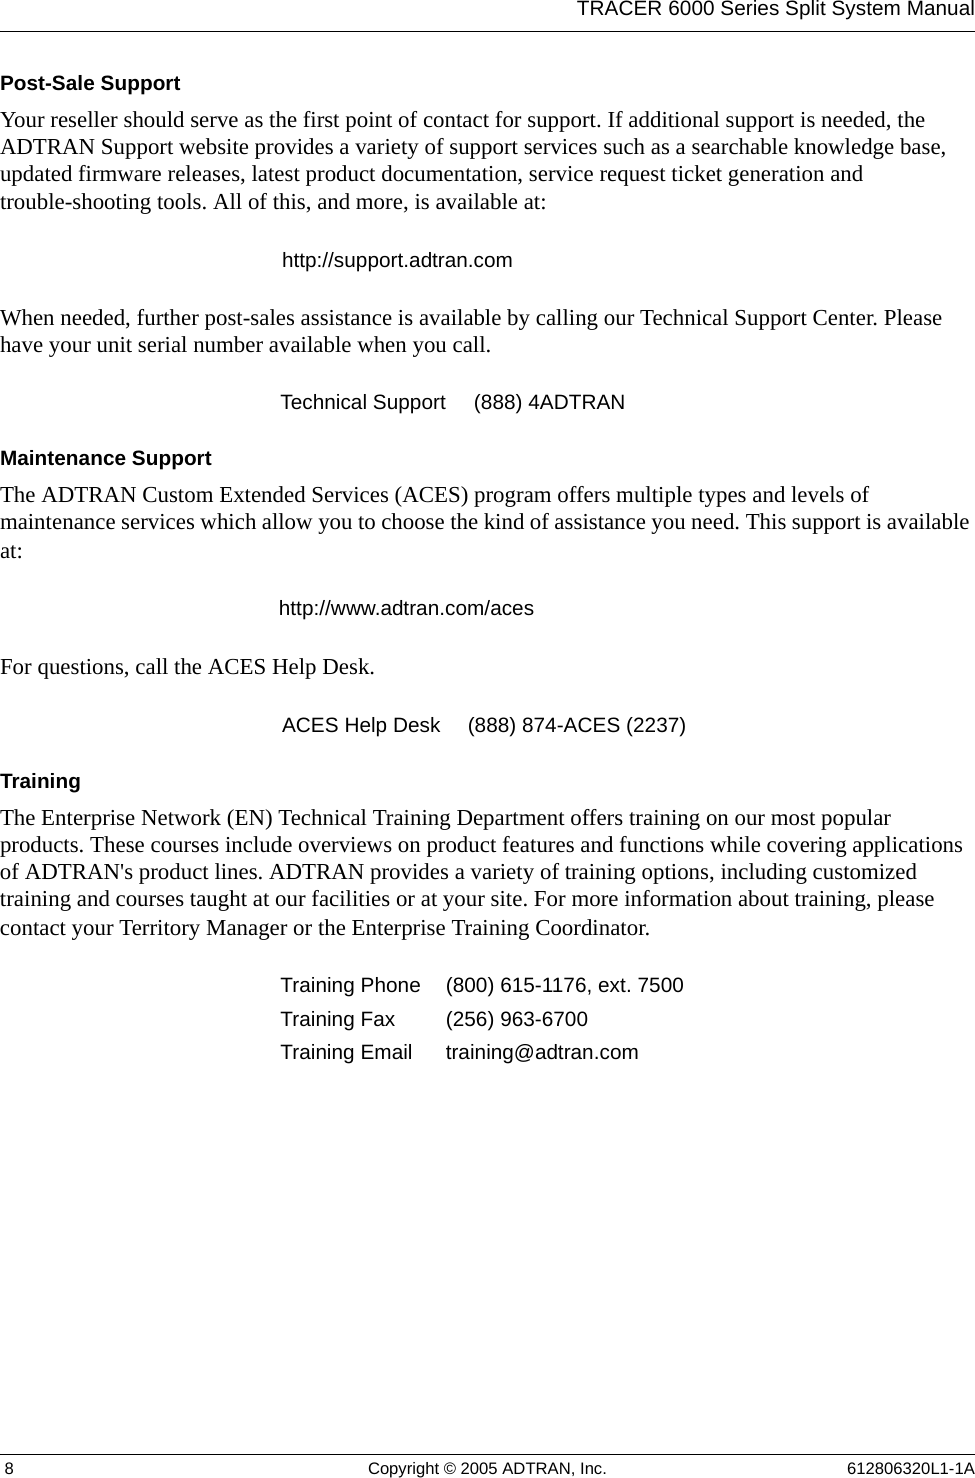 TRACER 6000 Series Split System Manual 8 Copyright © 2005 ADTRAN, Inc. 612806320L1-1APost-Sale SupportYour reseller should serve as the first point of contact for support. If additional support is needed, the ADTRAN Support website provides a variety of support services such as a searchable knowledge base, updated firmware releases, latest product documentation, service request ticket generation and trouble-shooting tools. All of this, and more, is available at:When needed, further post-sales assistance is available by calling our Technical Support Center. Please have your unit serial number available when you call.Maintenance SupportThe ADTRAN Custom Extended Services (ACES) program offers multiple types and levels of maintenance services which allow you to choose the kind of assistance you need. This support is available at:For questions, call the ACES Help Desk. TrainingThe Enterprise Network (EN) Technical Training Department offers training on our most popular products. These courses include overviews on product features and functions while covering applications of ADTRAN&apos;s product lines. ADTRAN provides a variety of training options, including customized training and courses taught at our facilities or at your site. For more information about training, please contact your Territory Manager or the Enterprise Training Coordinator.http://support.adtran.comTechnical Support (888) 4ADTRANhttp://www.adtran.com/acesACES Help Desk (888) 874-ACES (2237) Training Phone (800) 615-1176, ext. 7500 Training Fax (256) 963-6700Training Email training@adtran.com